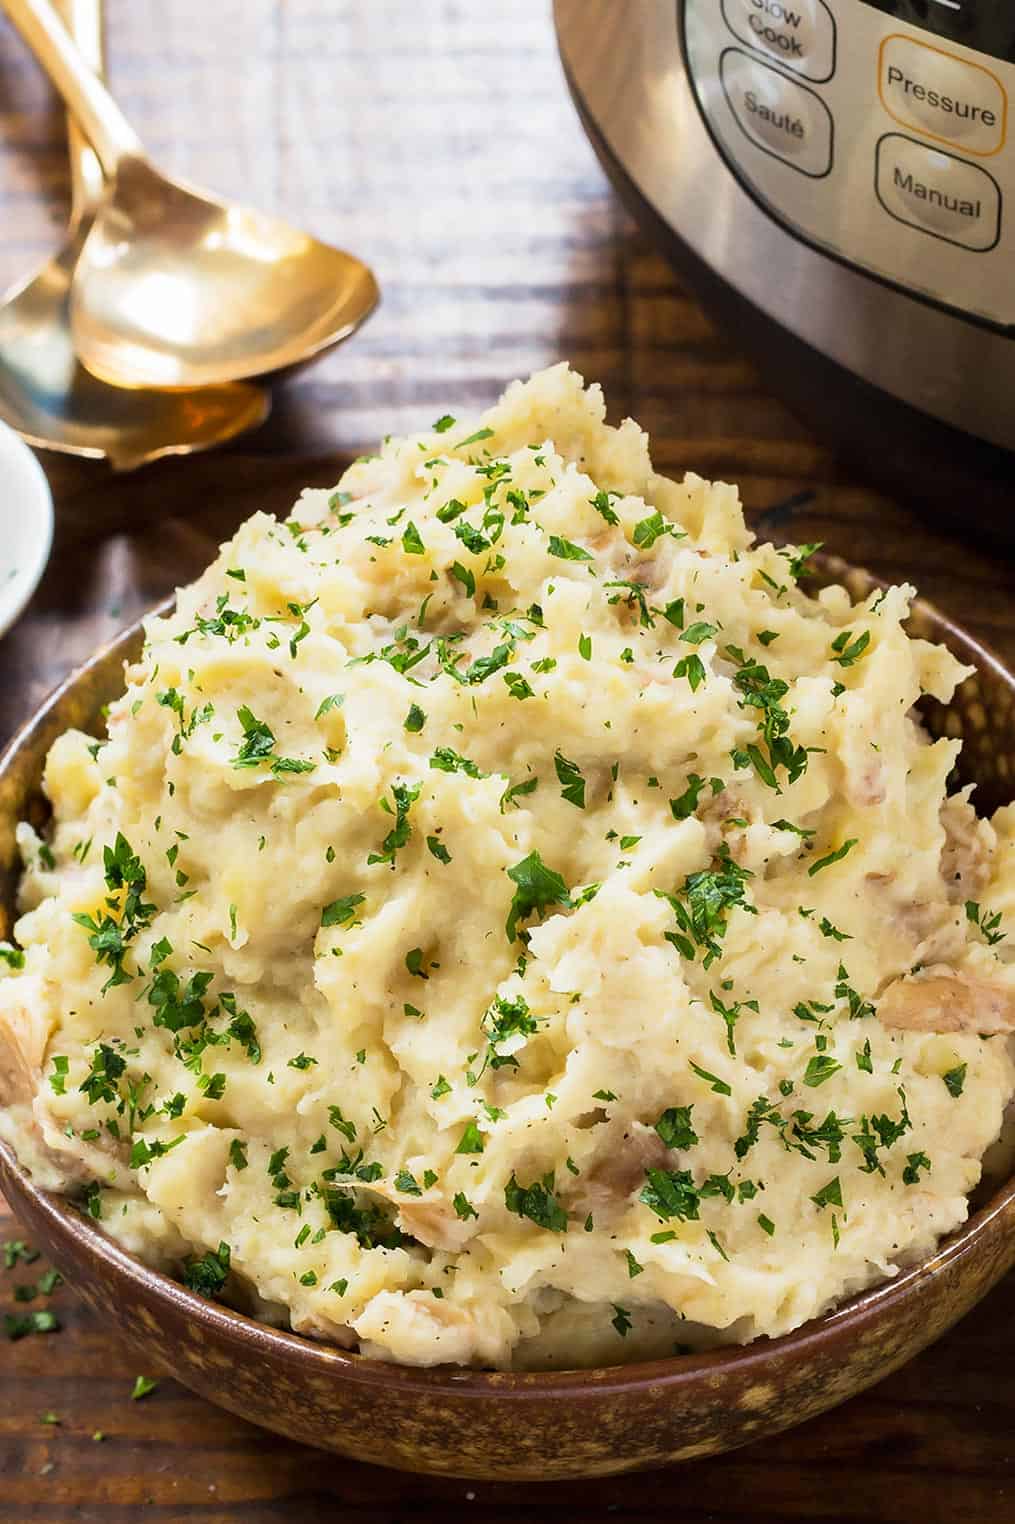 Mashed Potatoes with Parsley